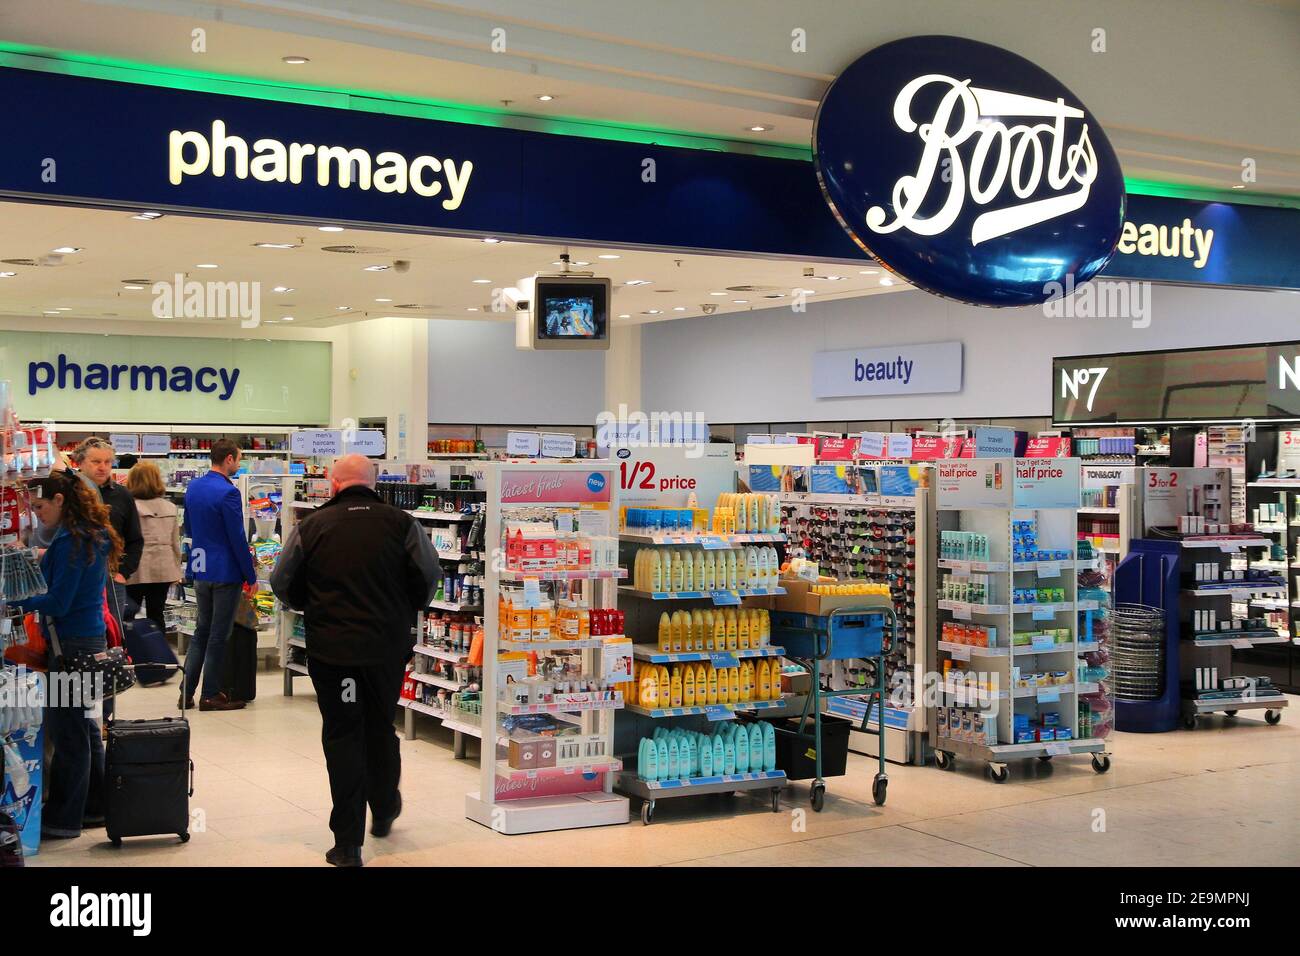 LONDON, UK - APRIL 16, 2014: People visit Boots at London Heathrow Airport. is a pharmaceutical retailer brand with 2,500 shops in Stock Photo - Alamy